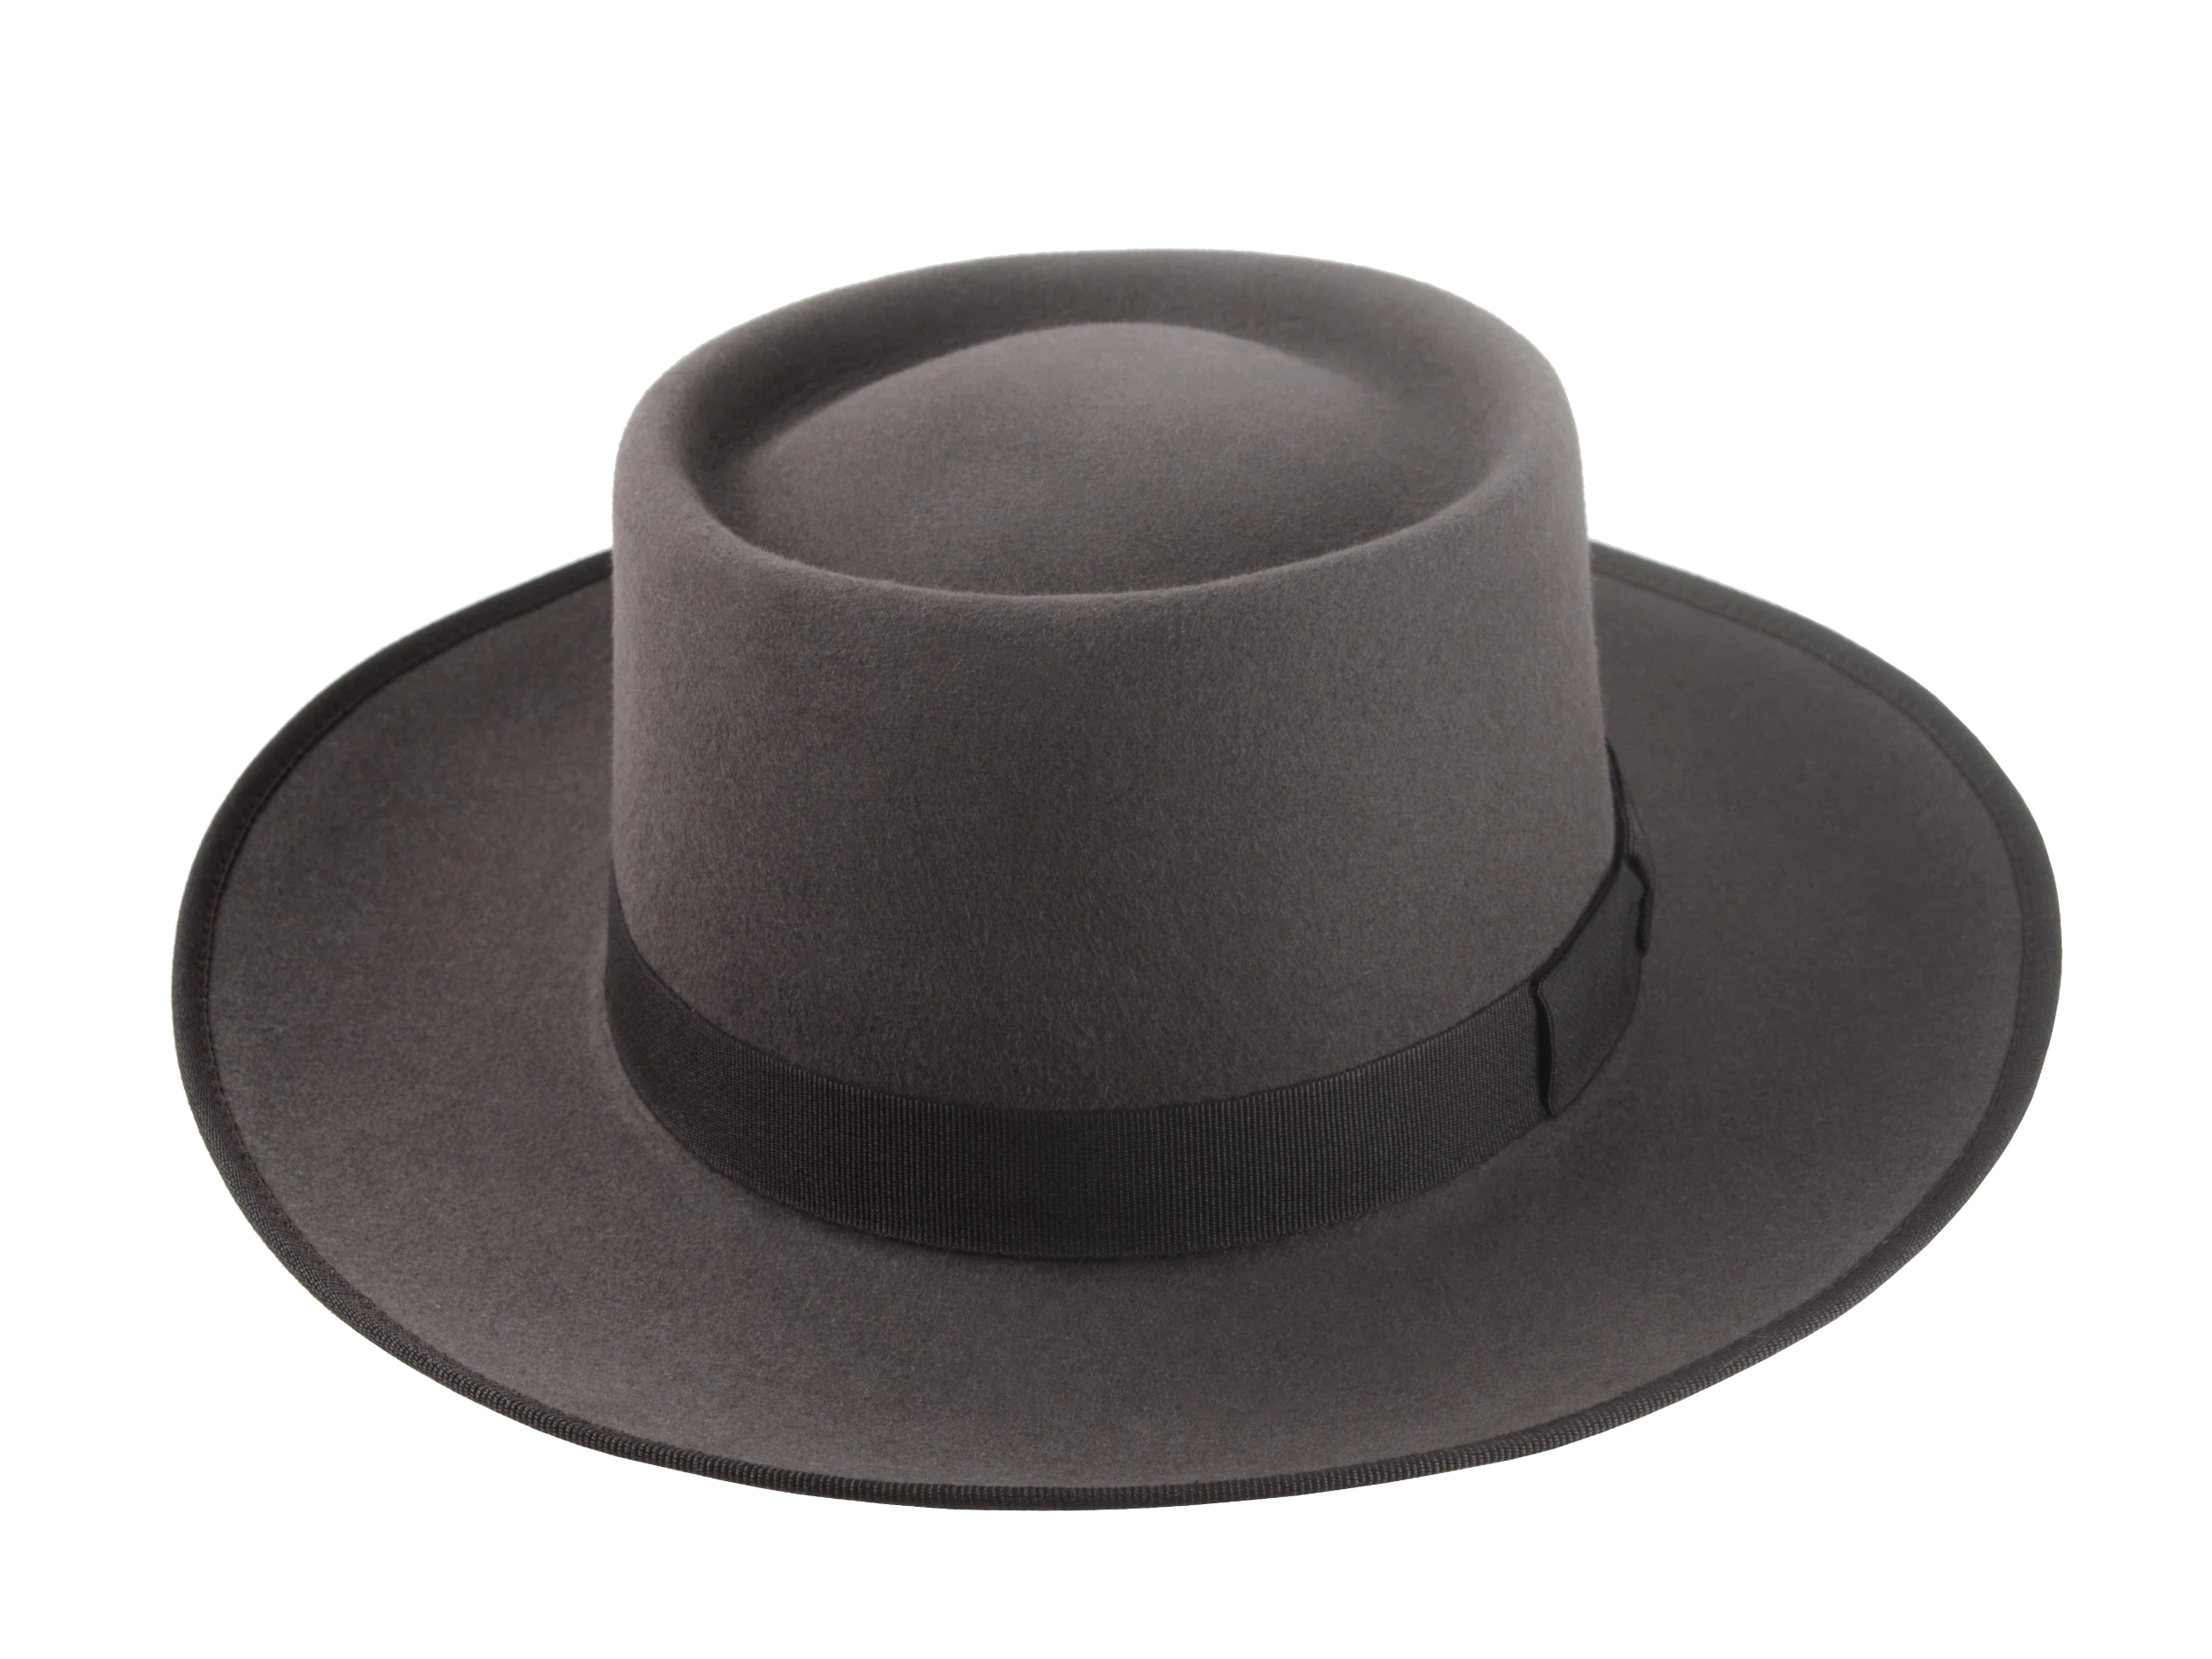 The Oppenheimer: Displaying the hat's perfect symmetry from a front angle | Agnoulita Hats